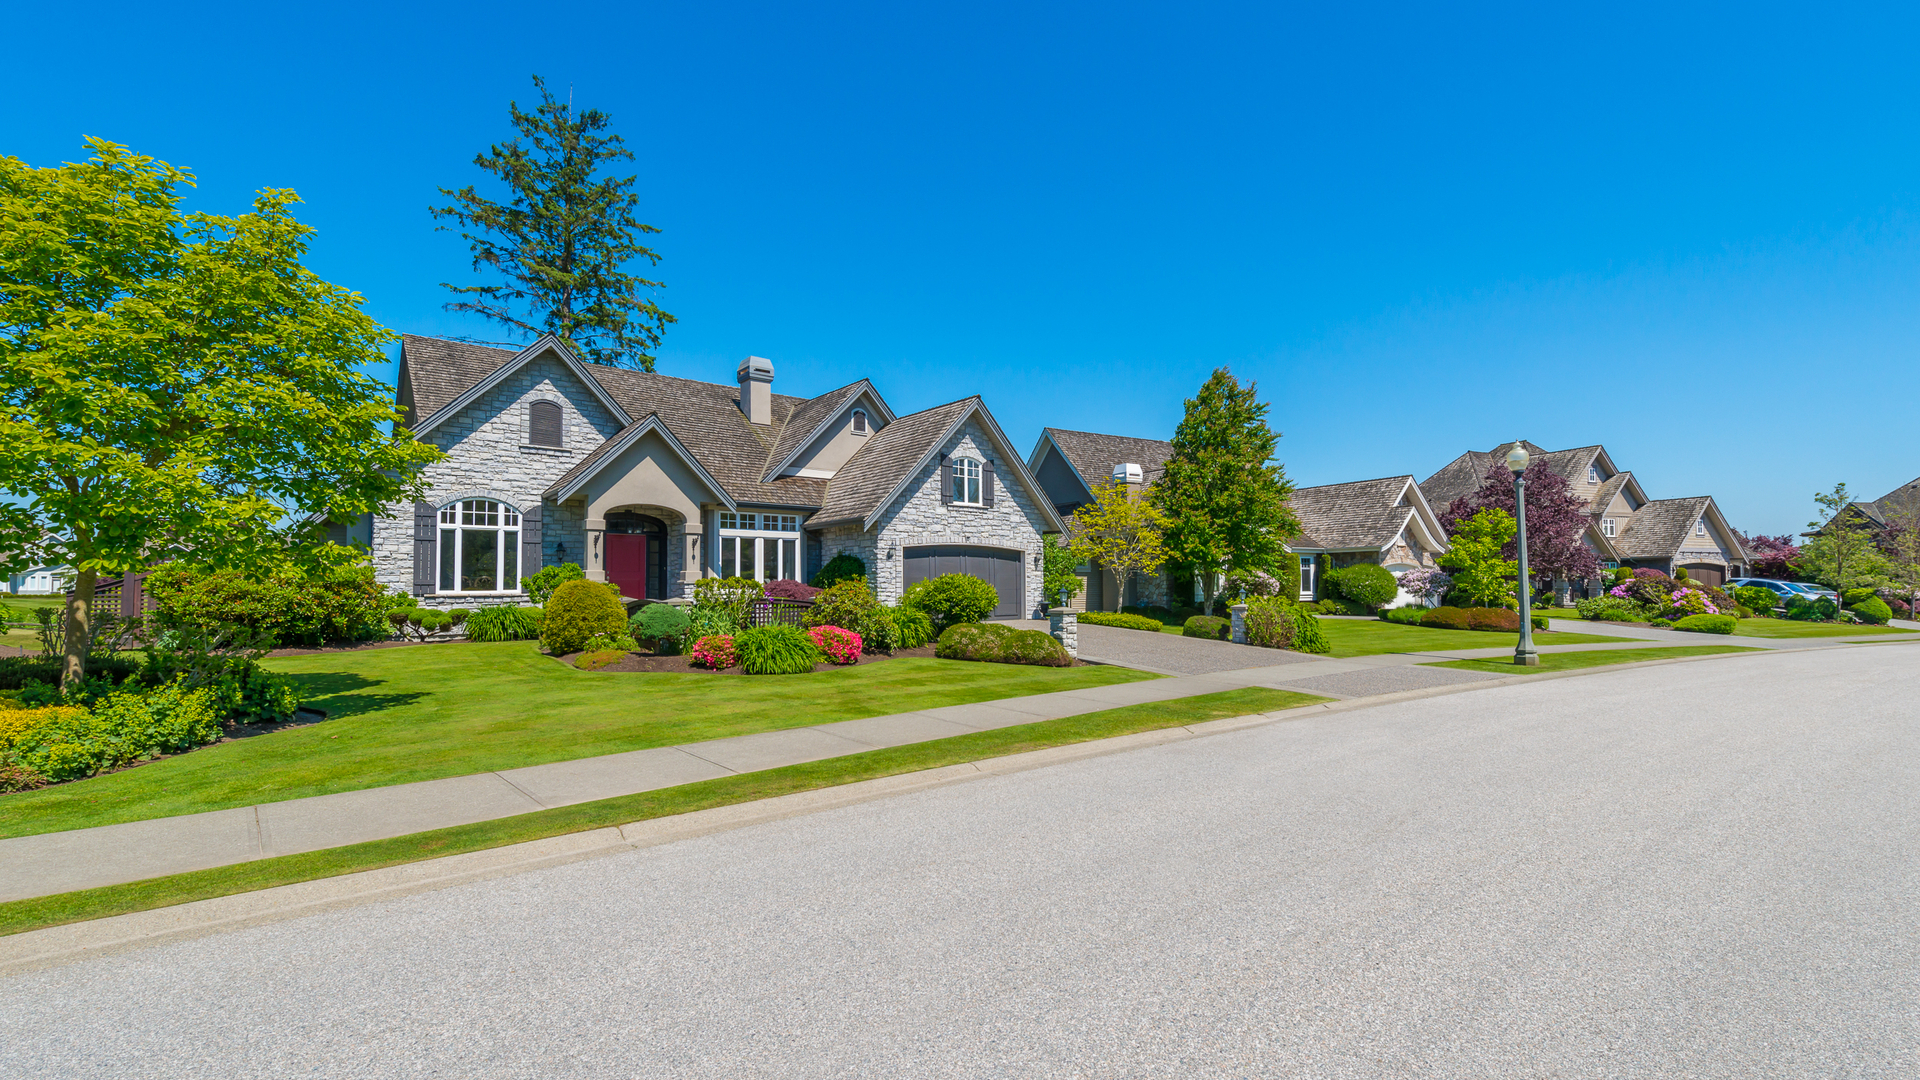 A neighborhood in Red Hill, PA with healthy plenty of healthy grass and landscaping.